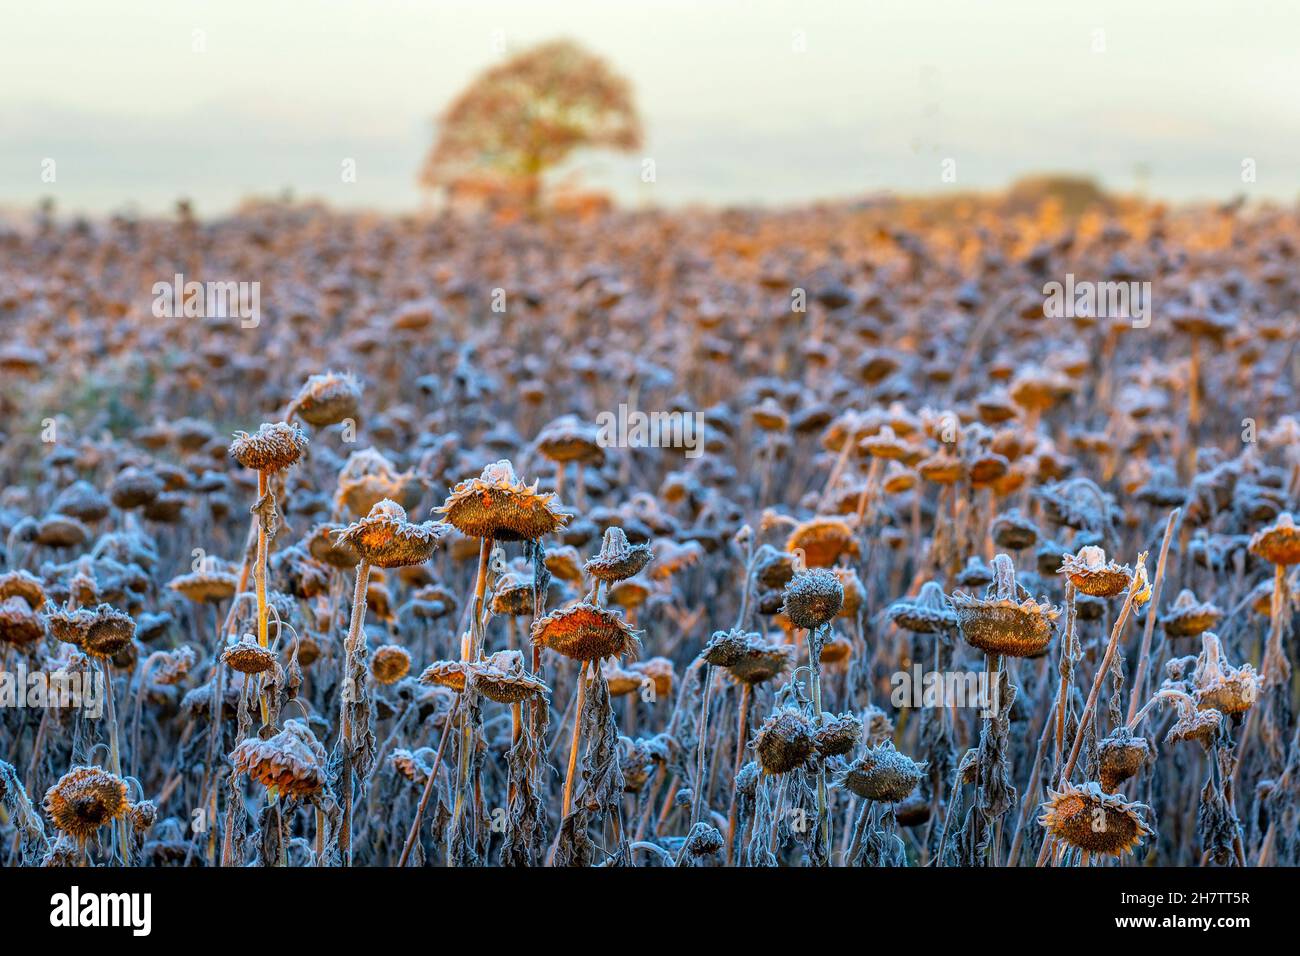 Bretherton, Lancashiure.  UK Weather. 25 Nov 2021.   Cold frosty chilly morning with hoar feathery frost on sunflower seed heads. A stunning  flowering cereal crop when in bloom this six acre field is ready to harvest as the ground hardens with the cool November temperatures. Sunflowers should be harvested harvested as soon as the calyx turns to its brownish/yellow color. Credit: MediaWorldImages/AlamyLiveNews Stock Photo